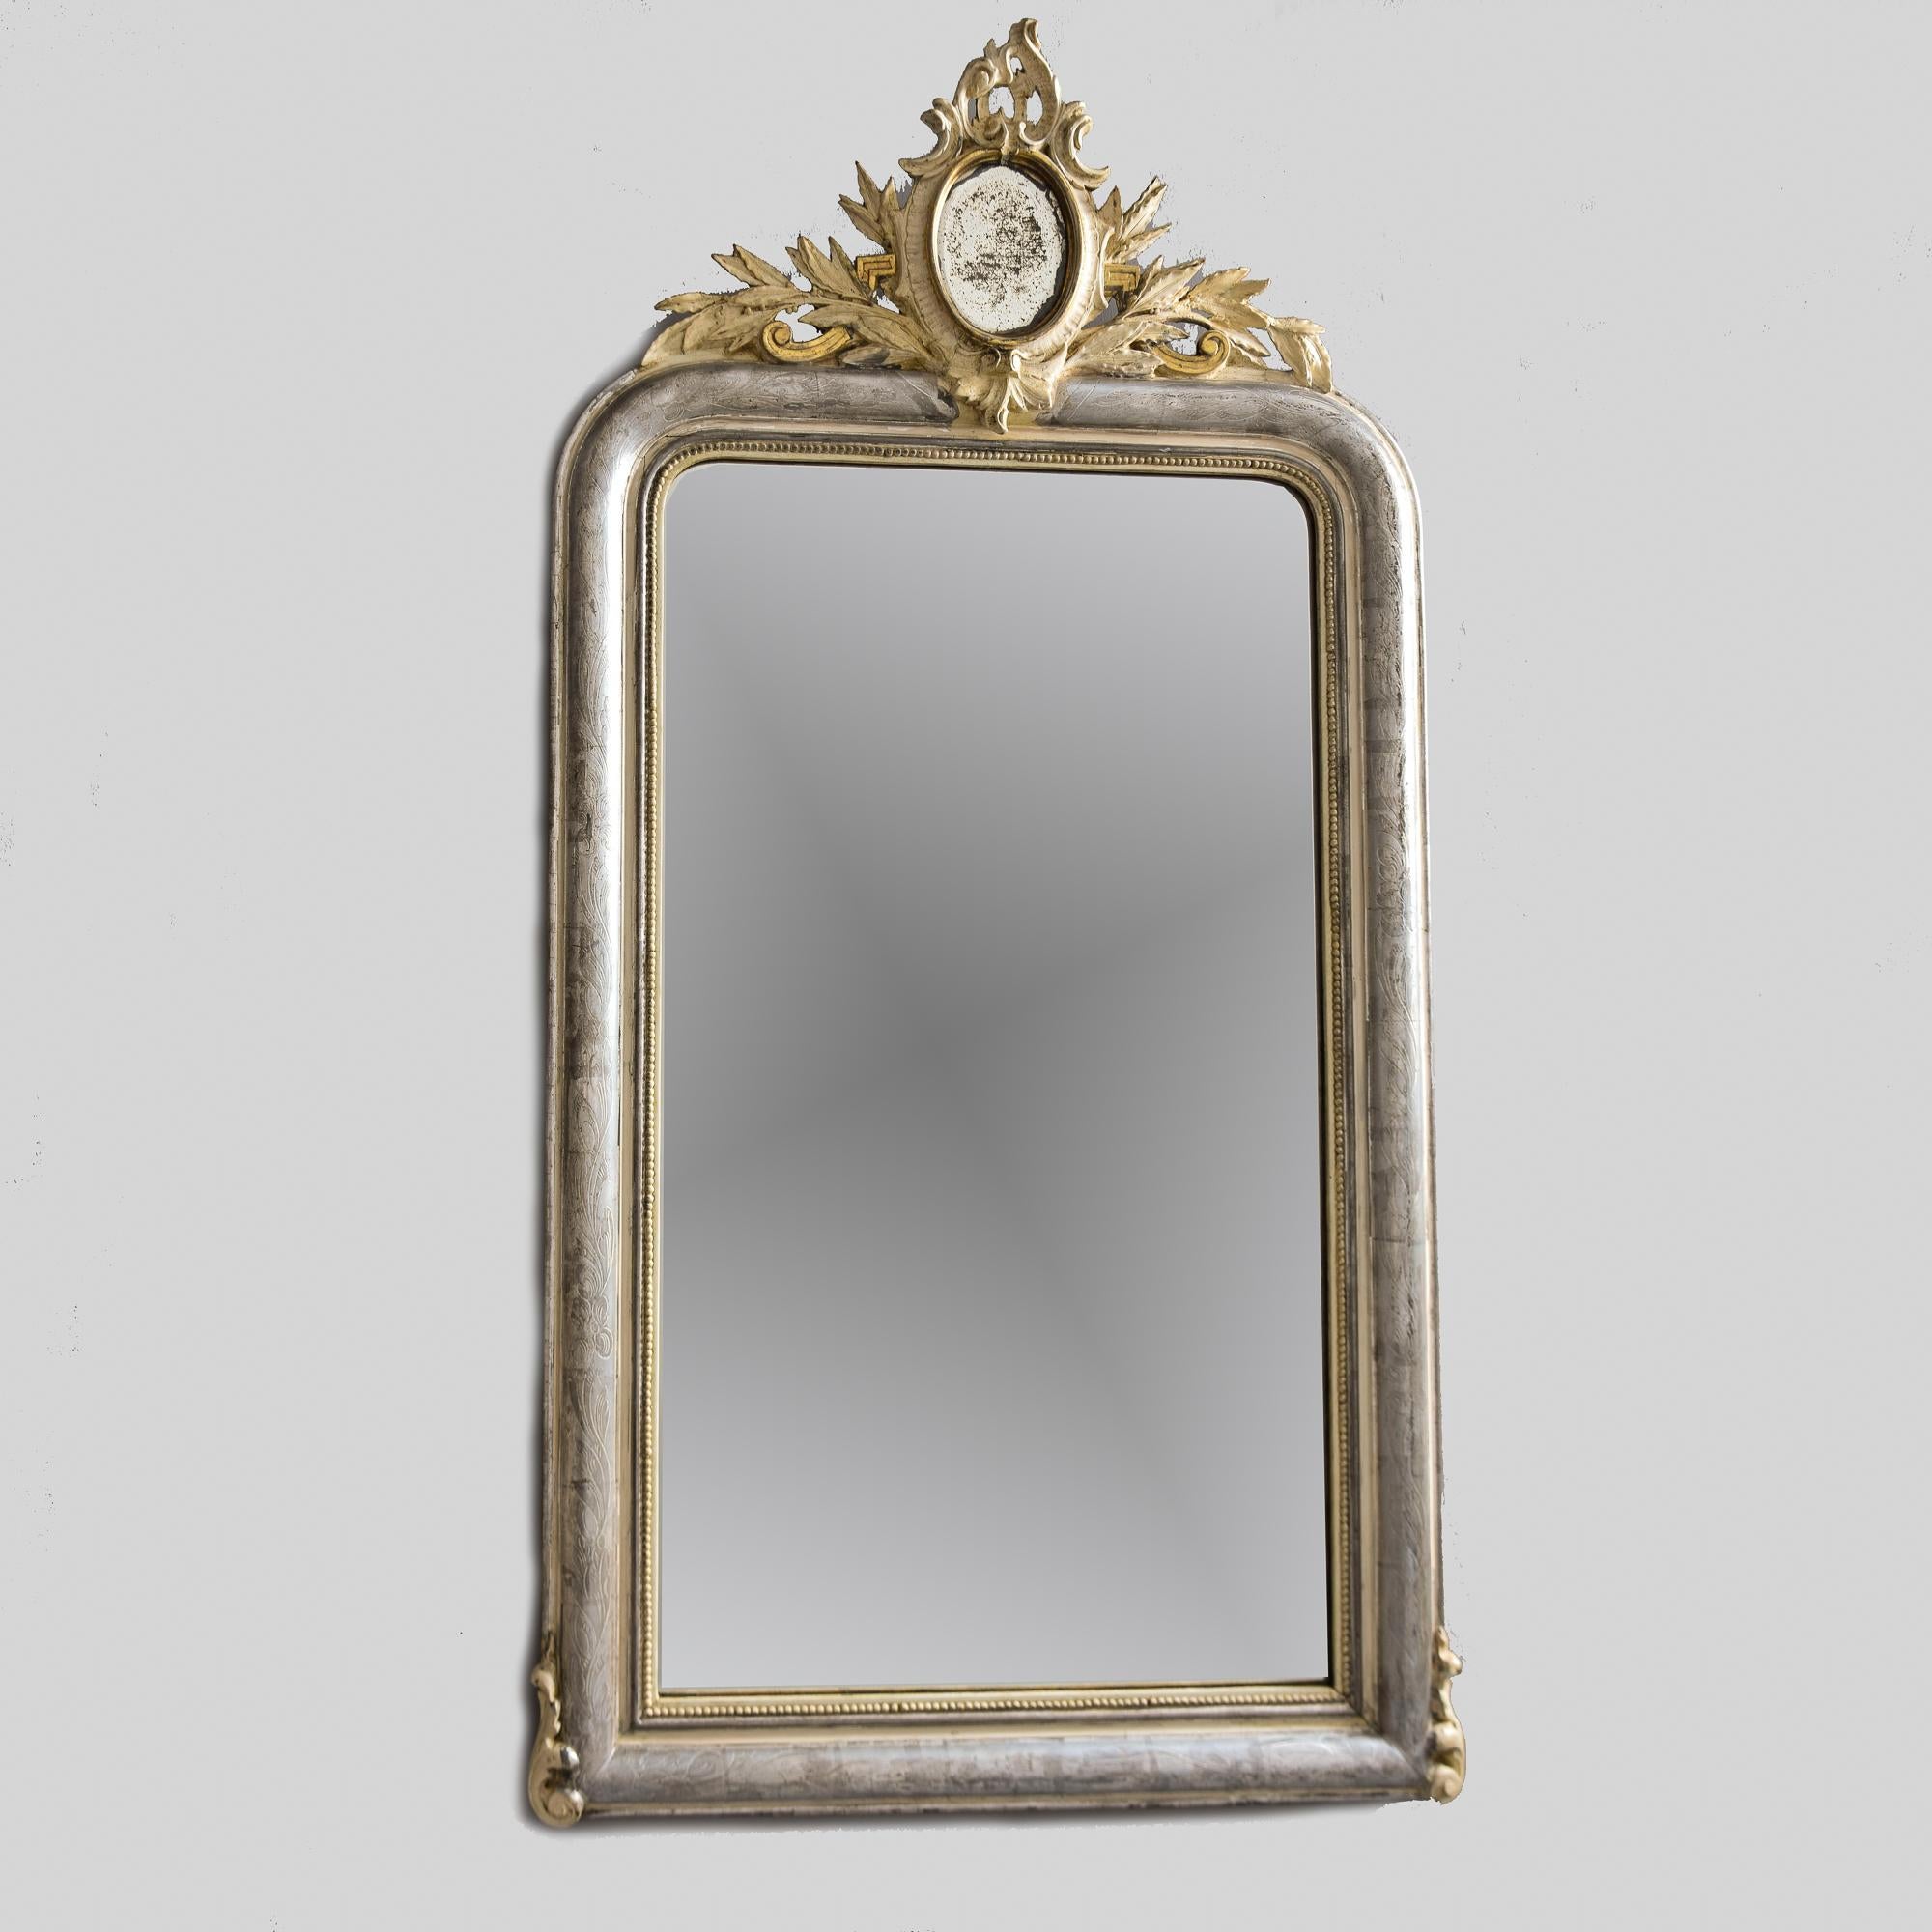 Found in France, this large Louis Philippe mirror dates from the 1870s. Silver gilt frame has subtle etched design of leaves and vines, contrasting gold leaf beaded trim on inner edge and giltwood crown with mirrored center. Giltwood details on